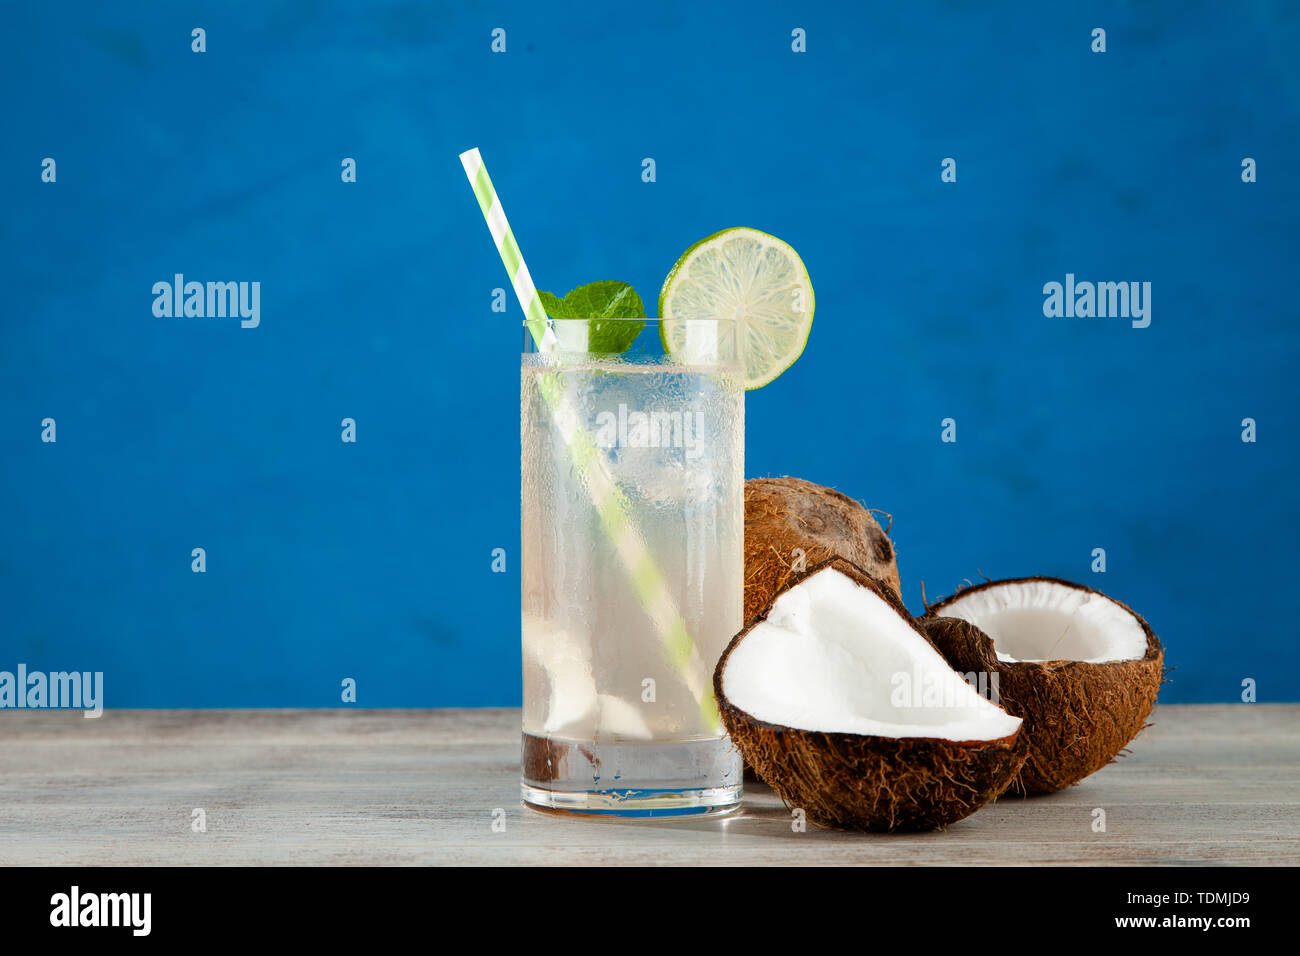 Coconut water drink on blue background Stock Photo